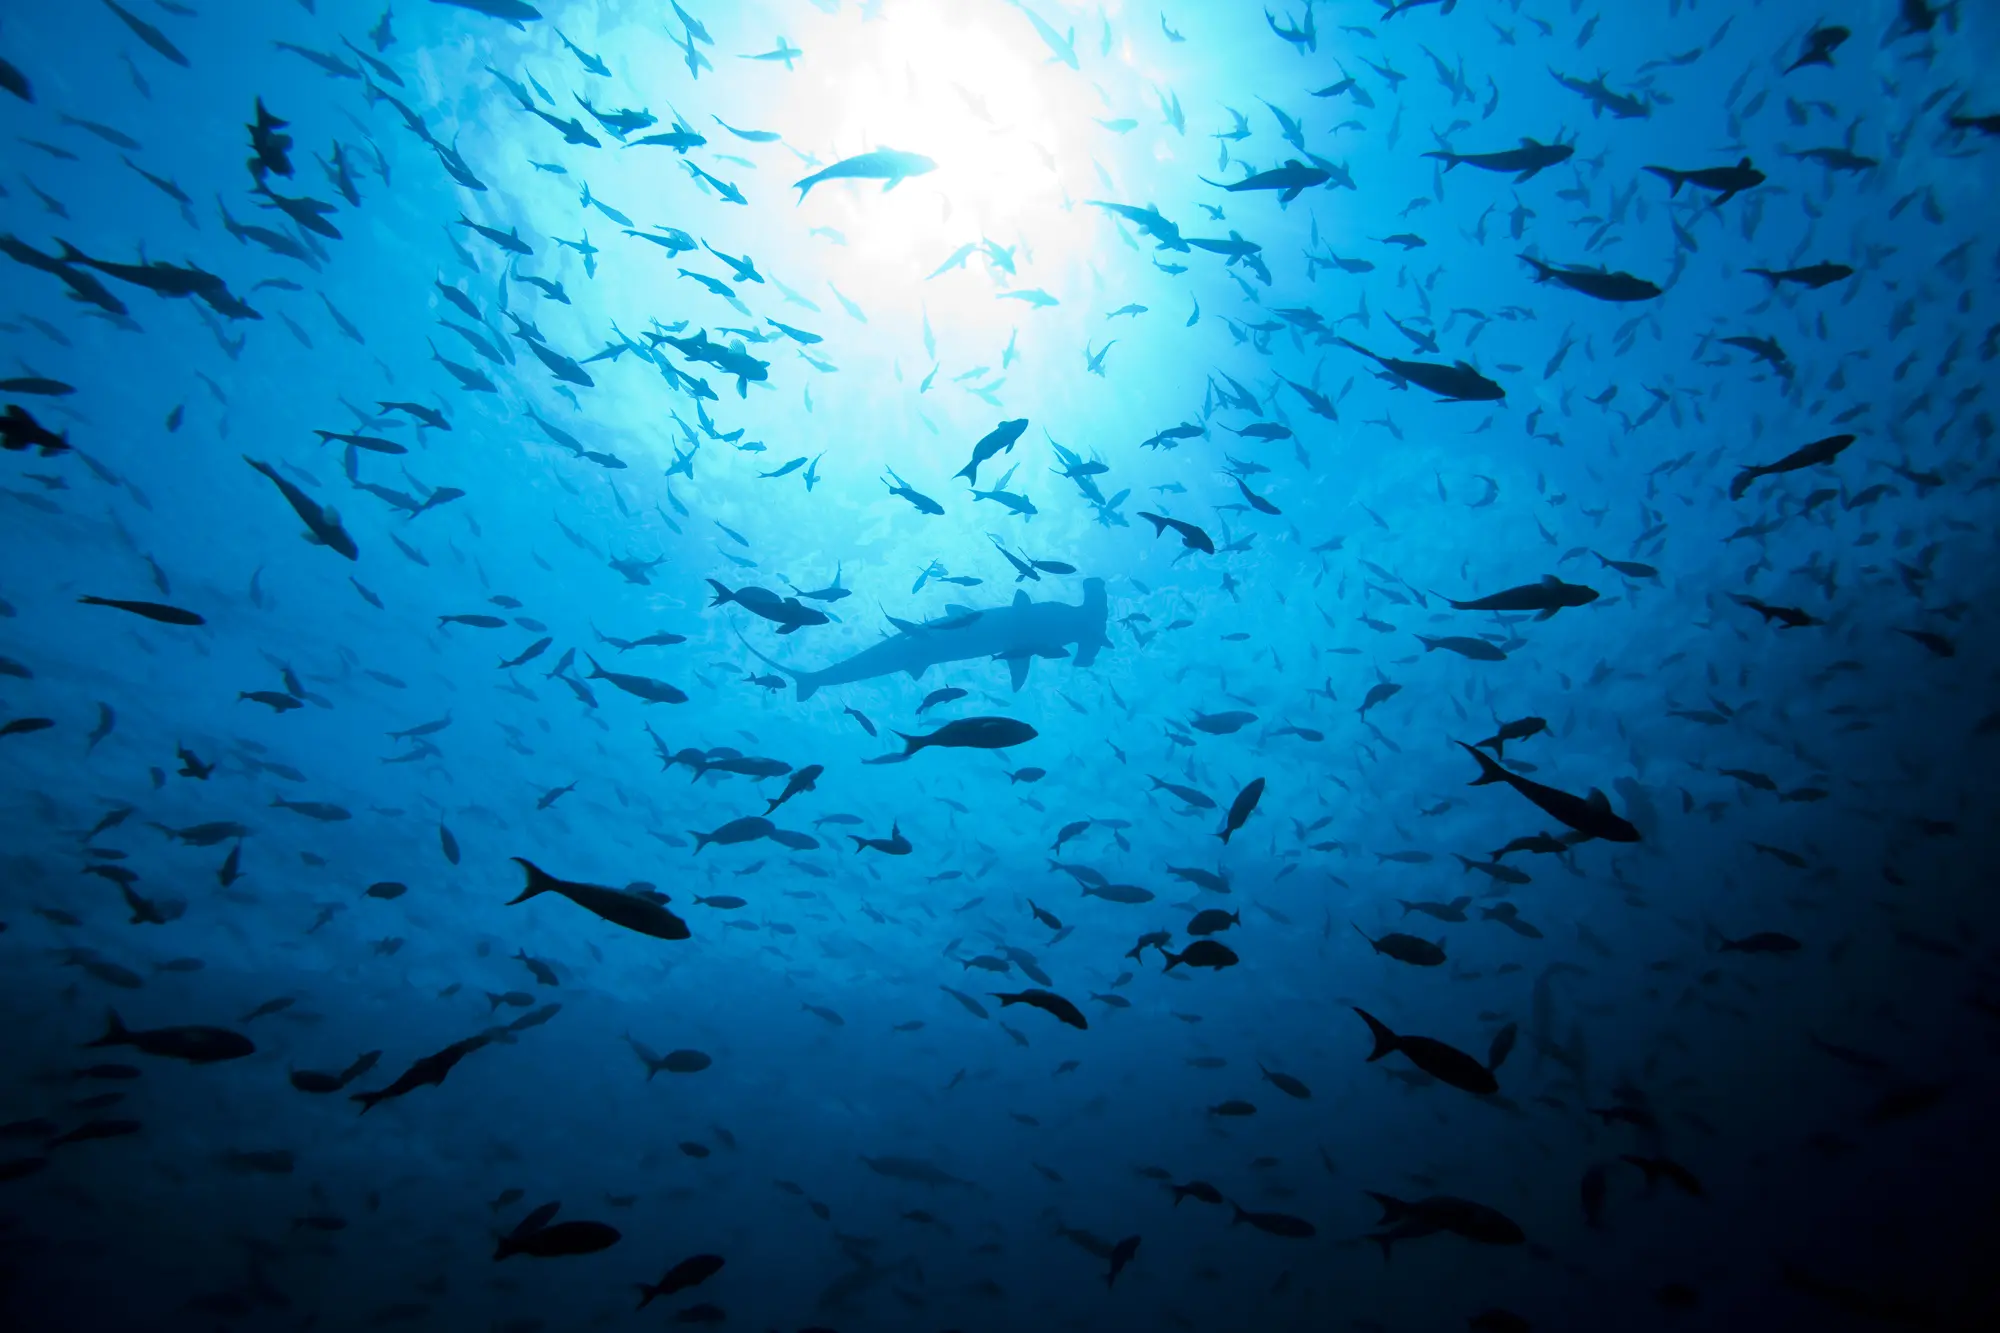 Marine Protected Areas cover almost 3% of the ocean